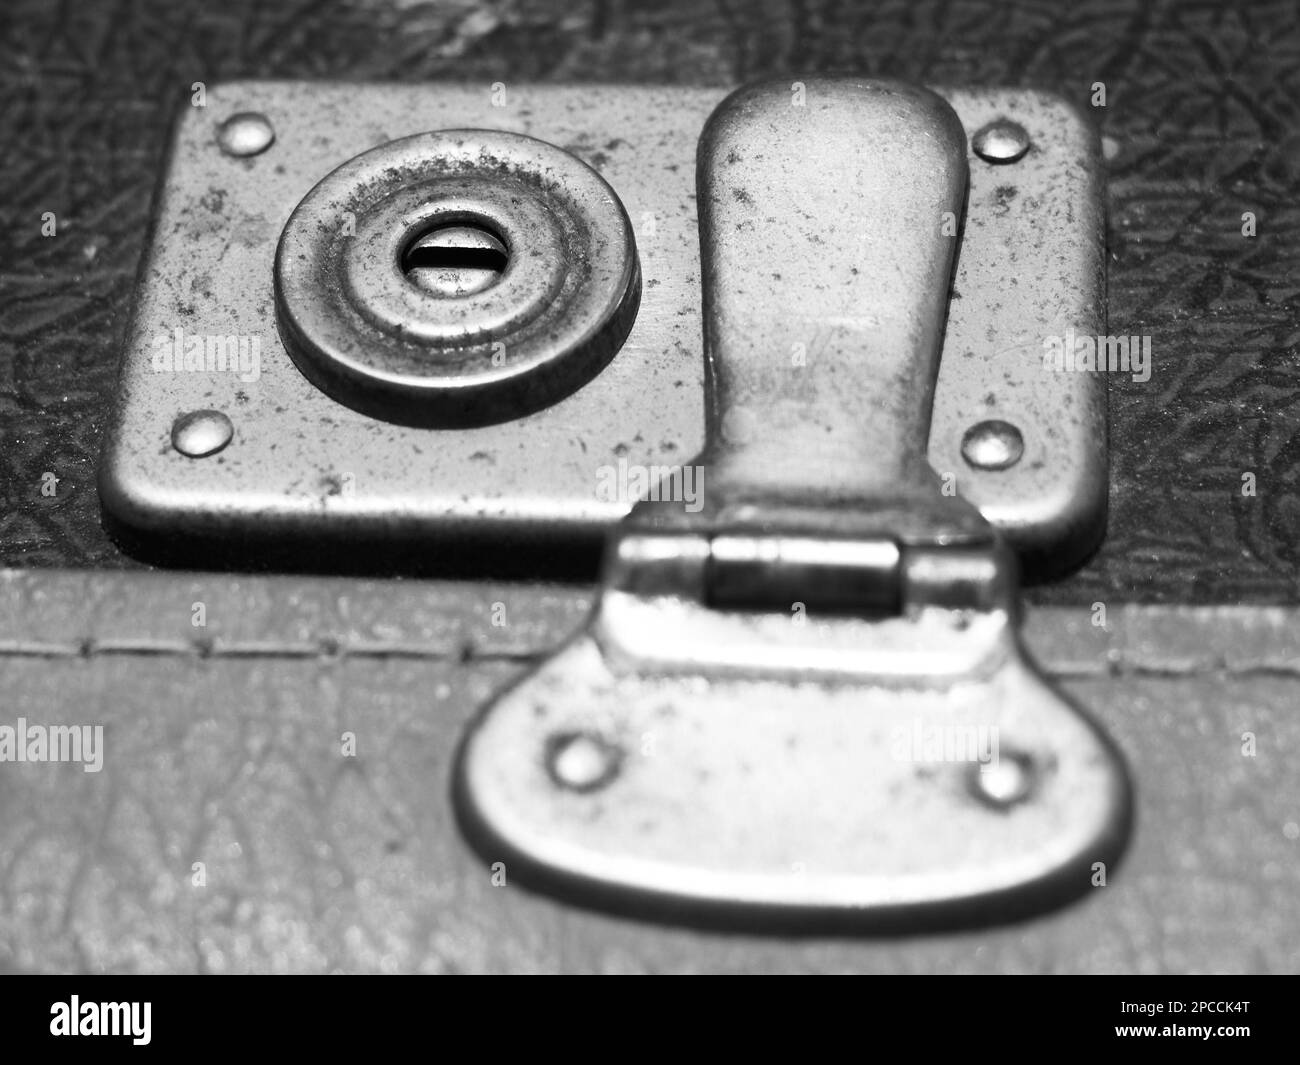 Lock on a vintage suitcase close-up Stock Photo